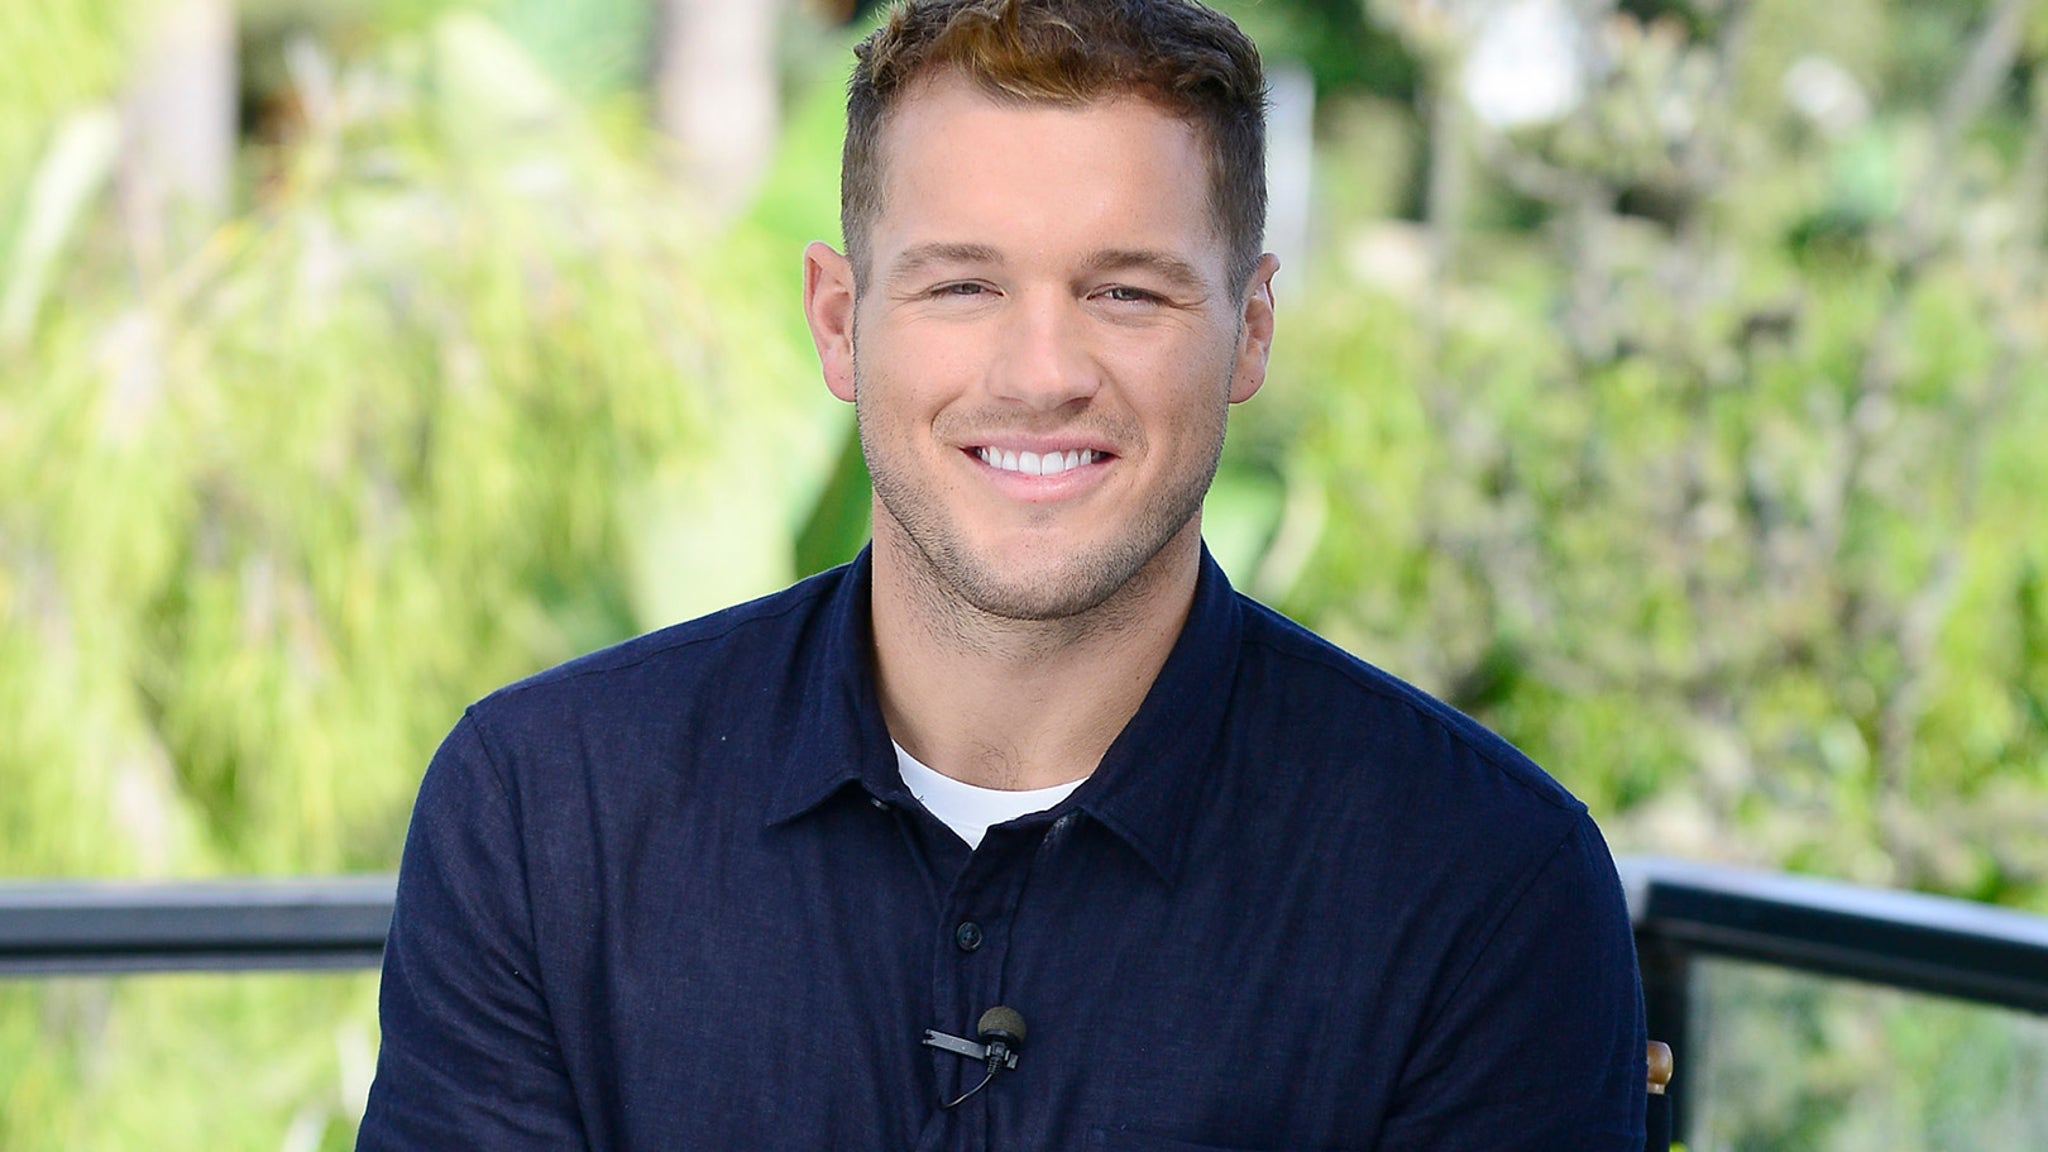 Colton Underwood Was Close to Coming Out Years Ago, Shares Why He Didn't